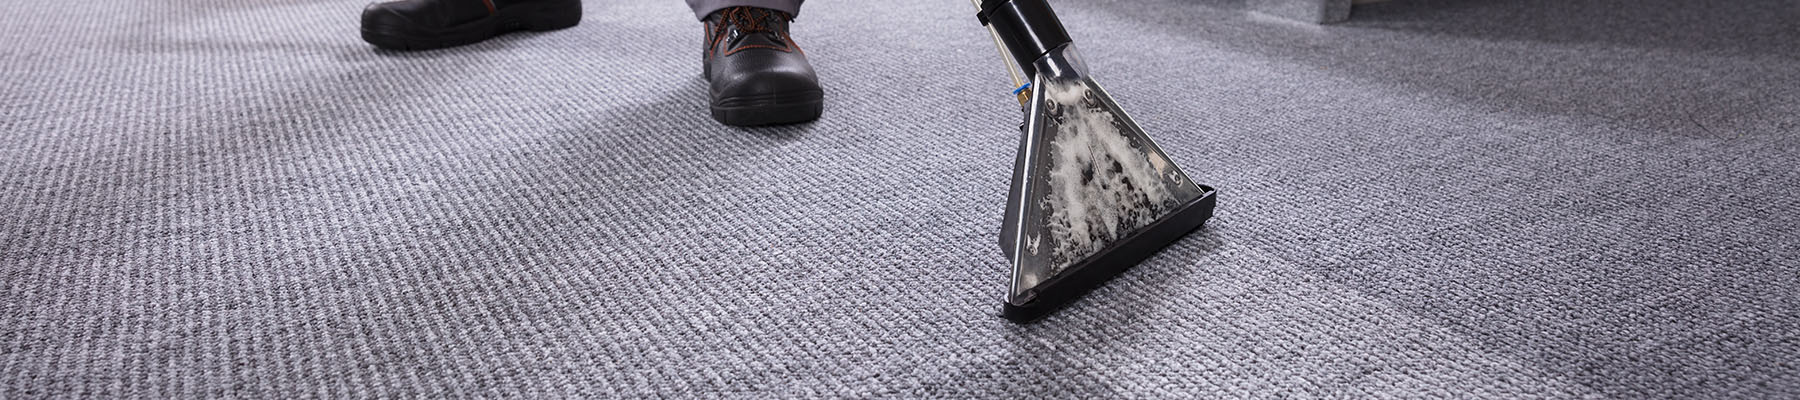 Professional Carpet Cleaning in Florida - Green Clean